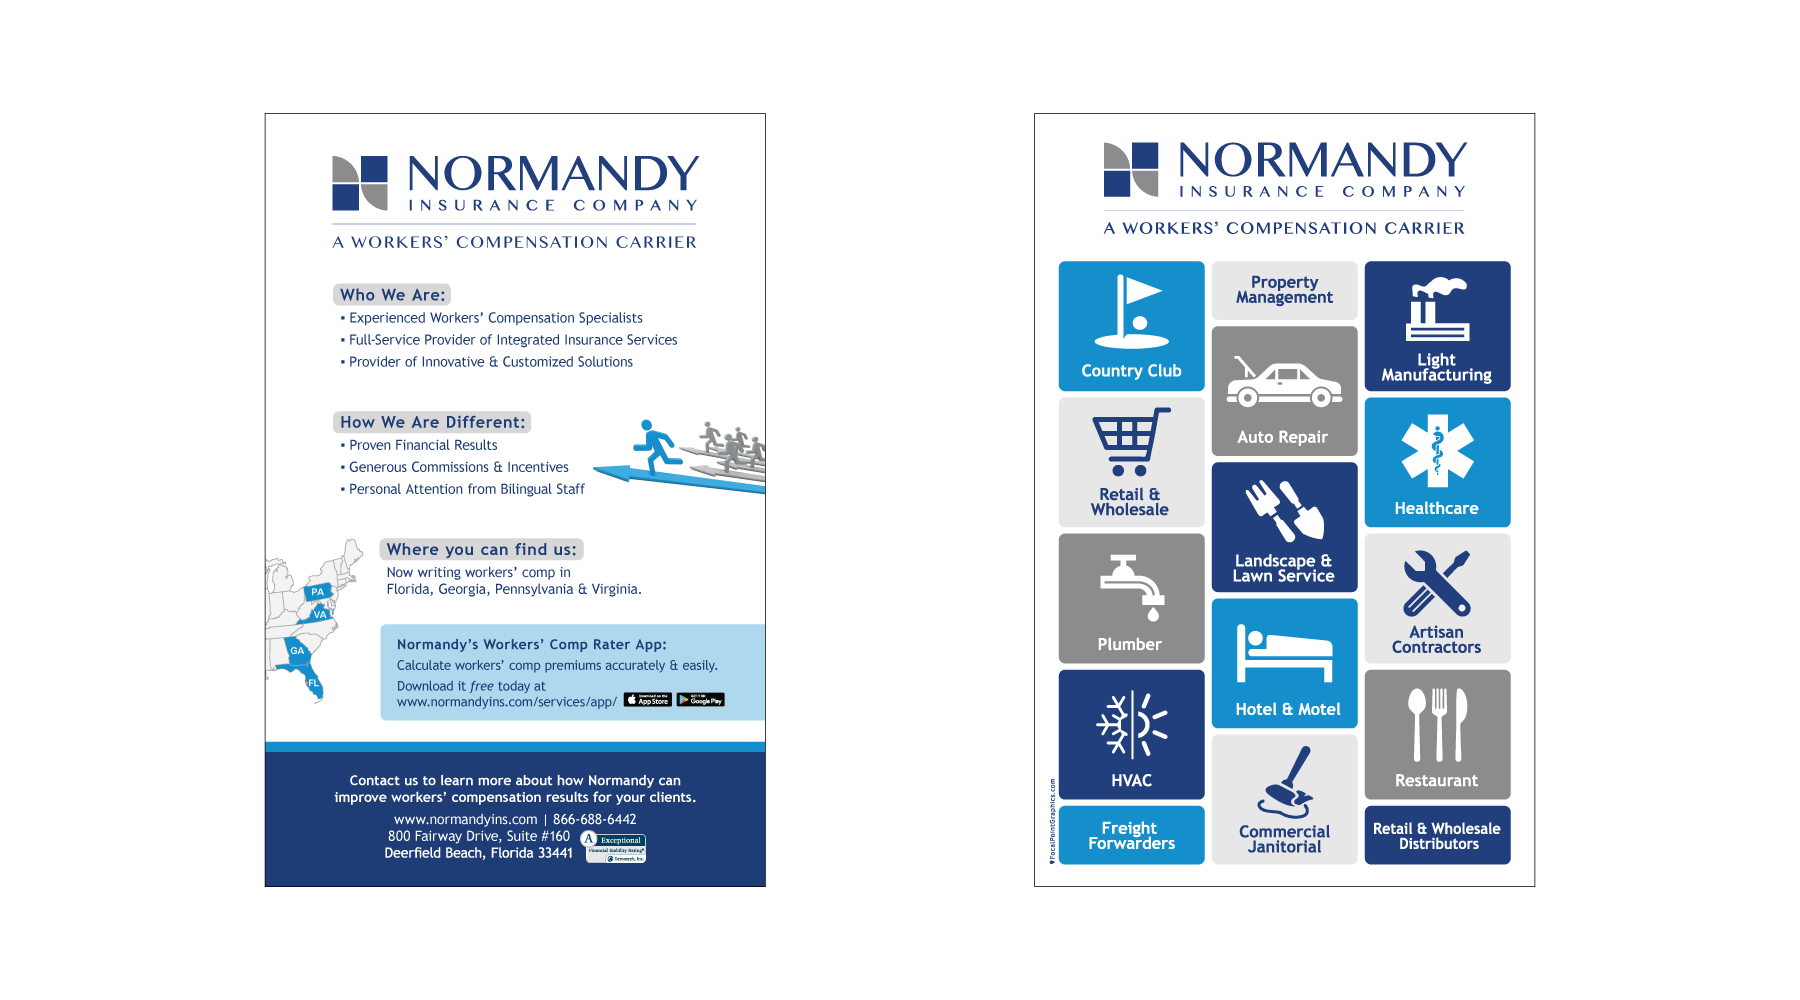 Normandy convetion card